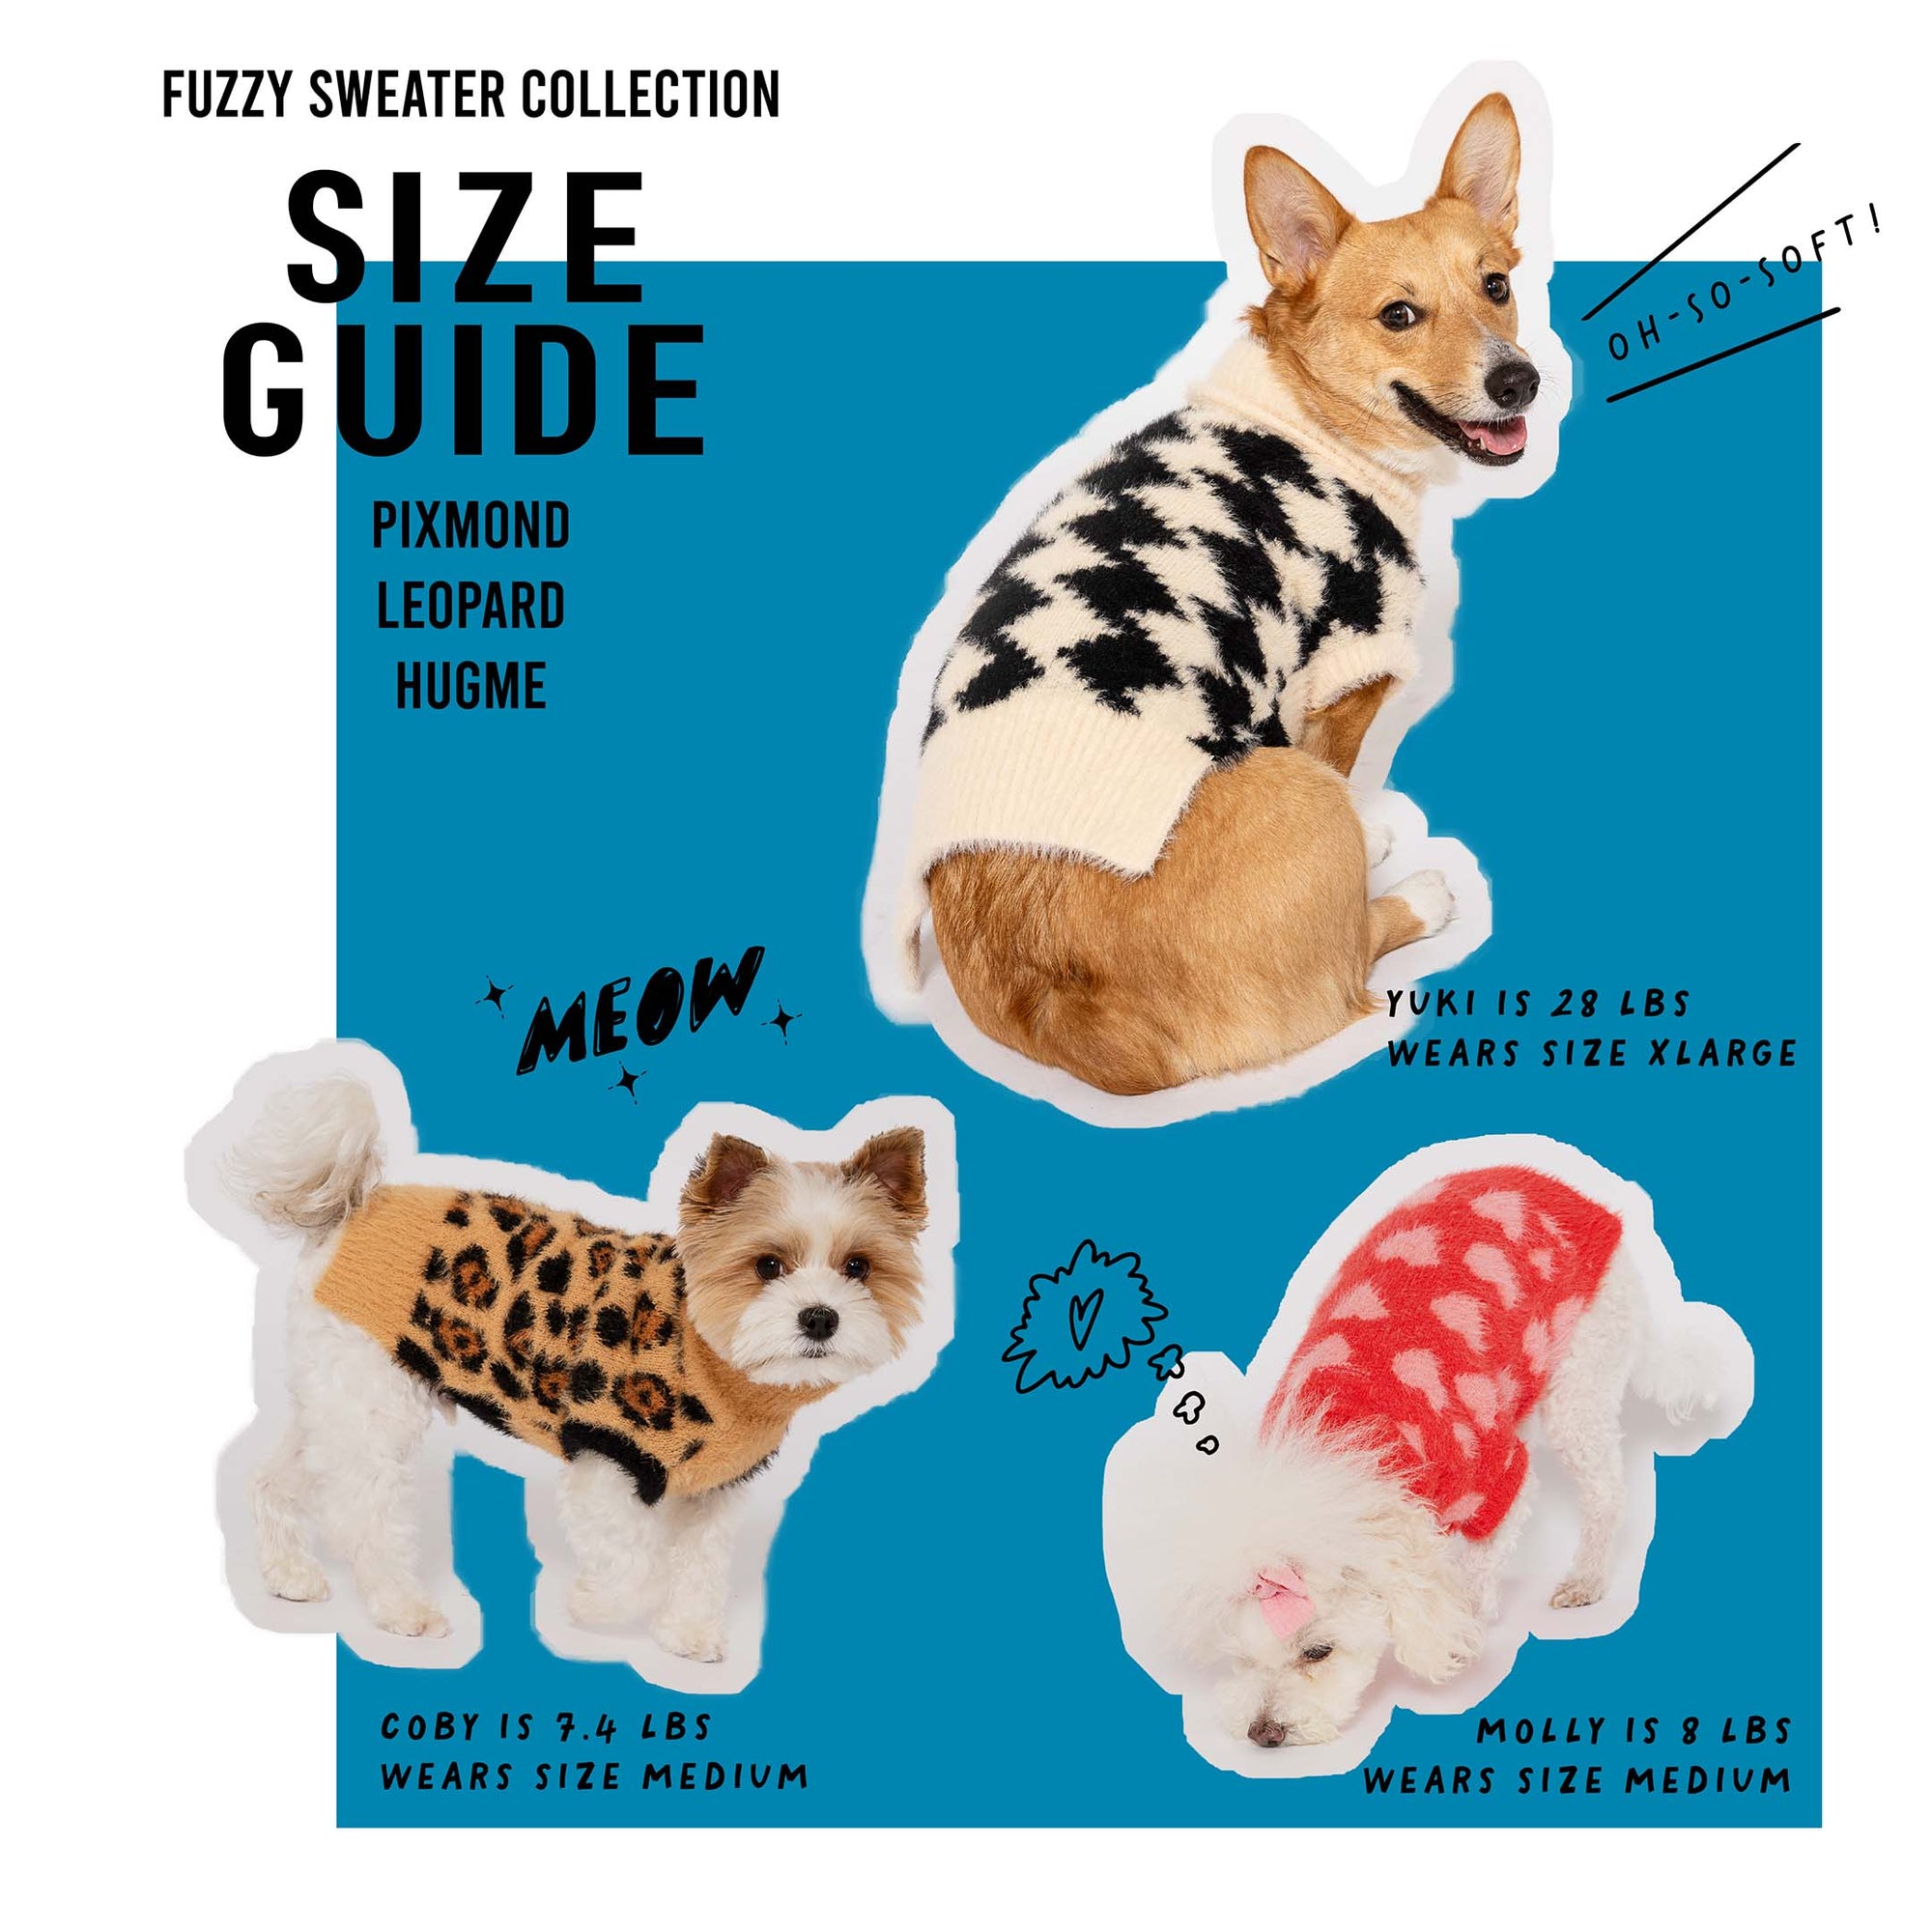 Size guide for dog sweaters featuring three breeds in stylish outfits: a Corgi in XL, a Yorkie in M leopard print, and a Poodle in M